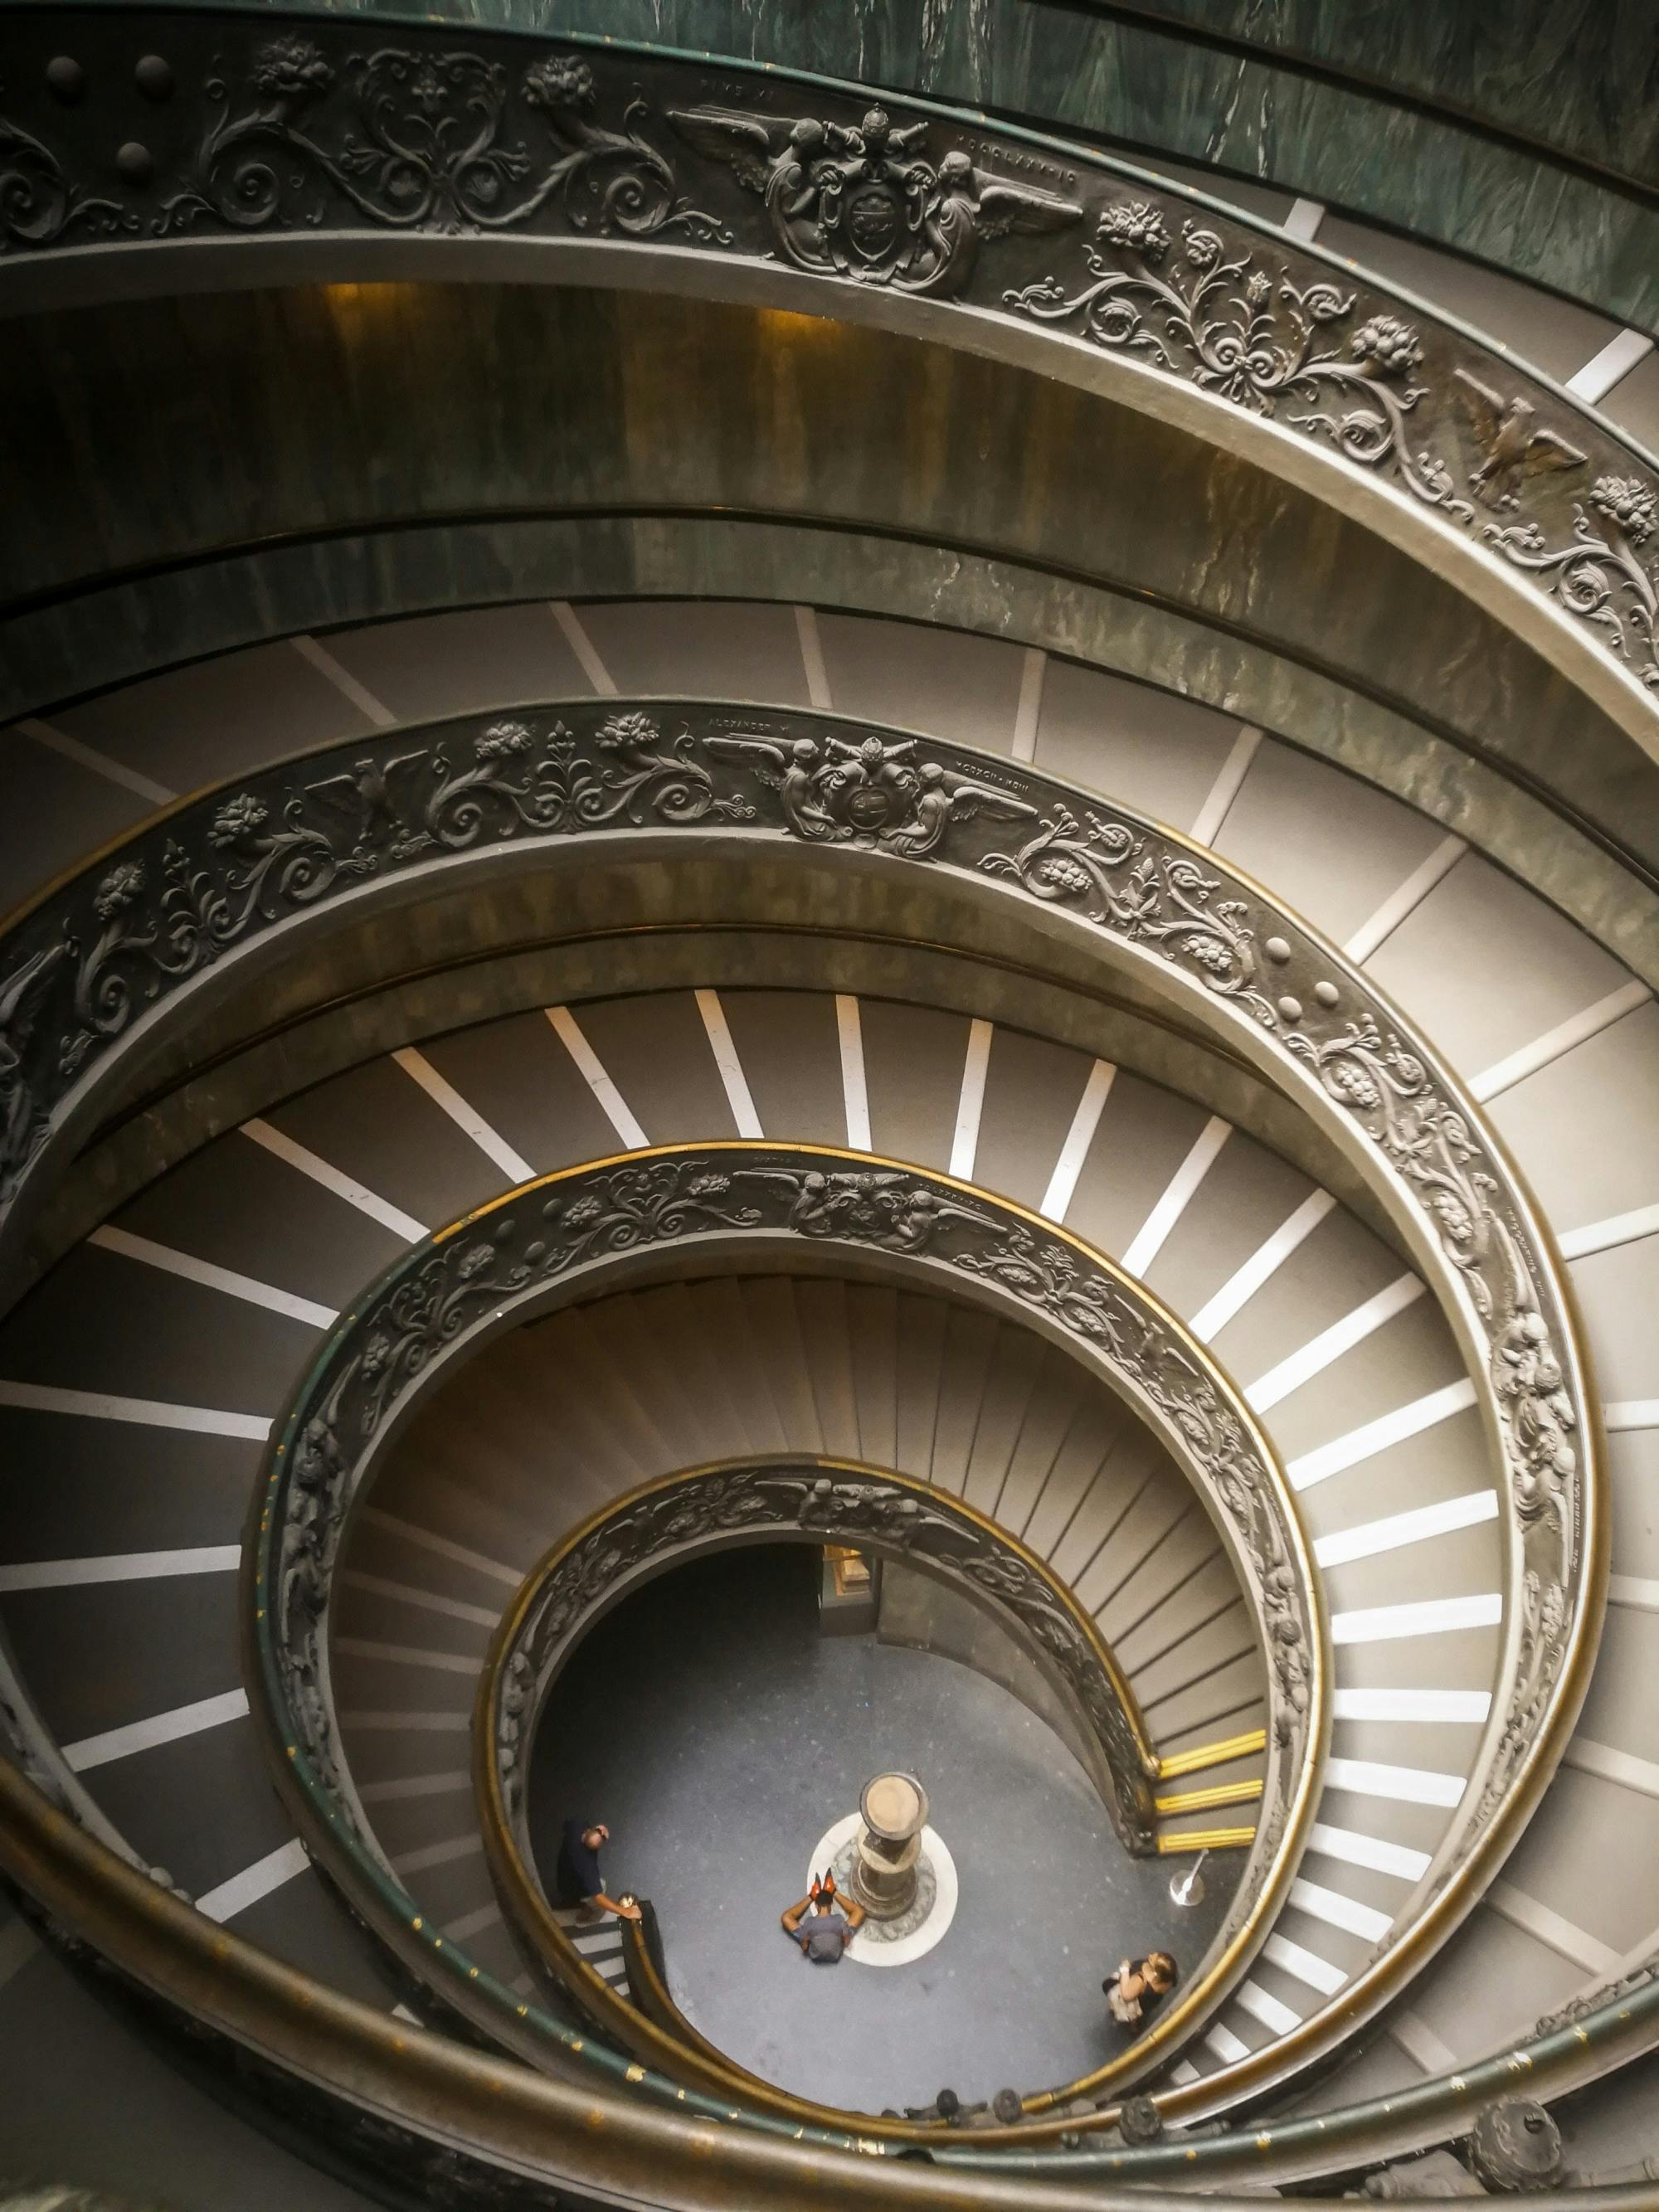 Vatican Museums Entrance Tickets with Brunch